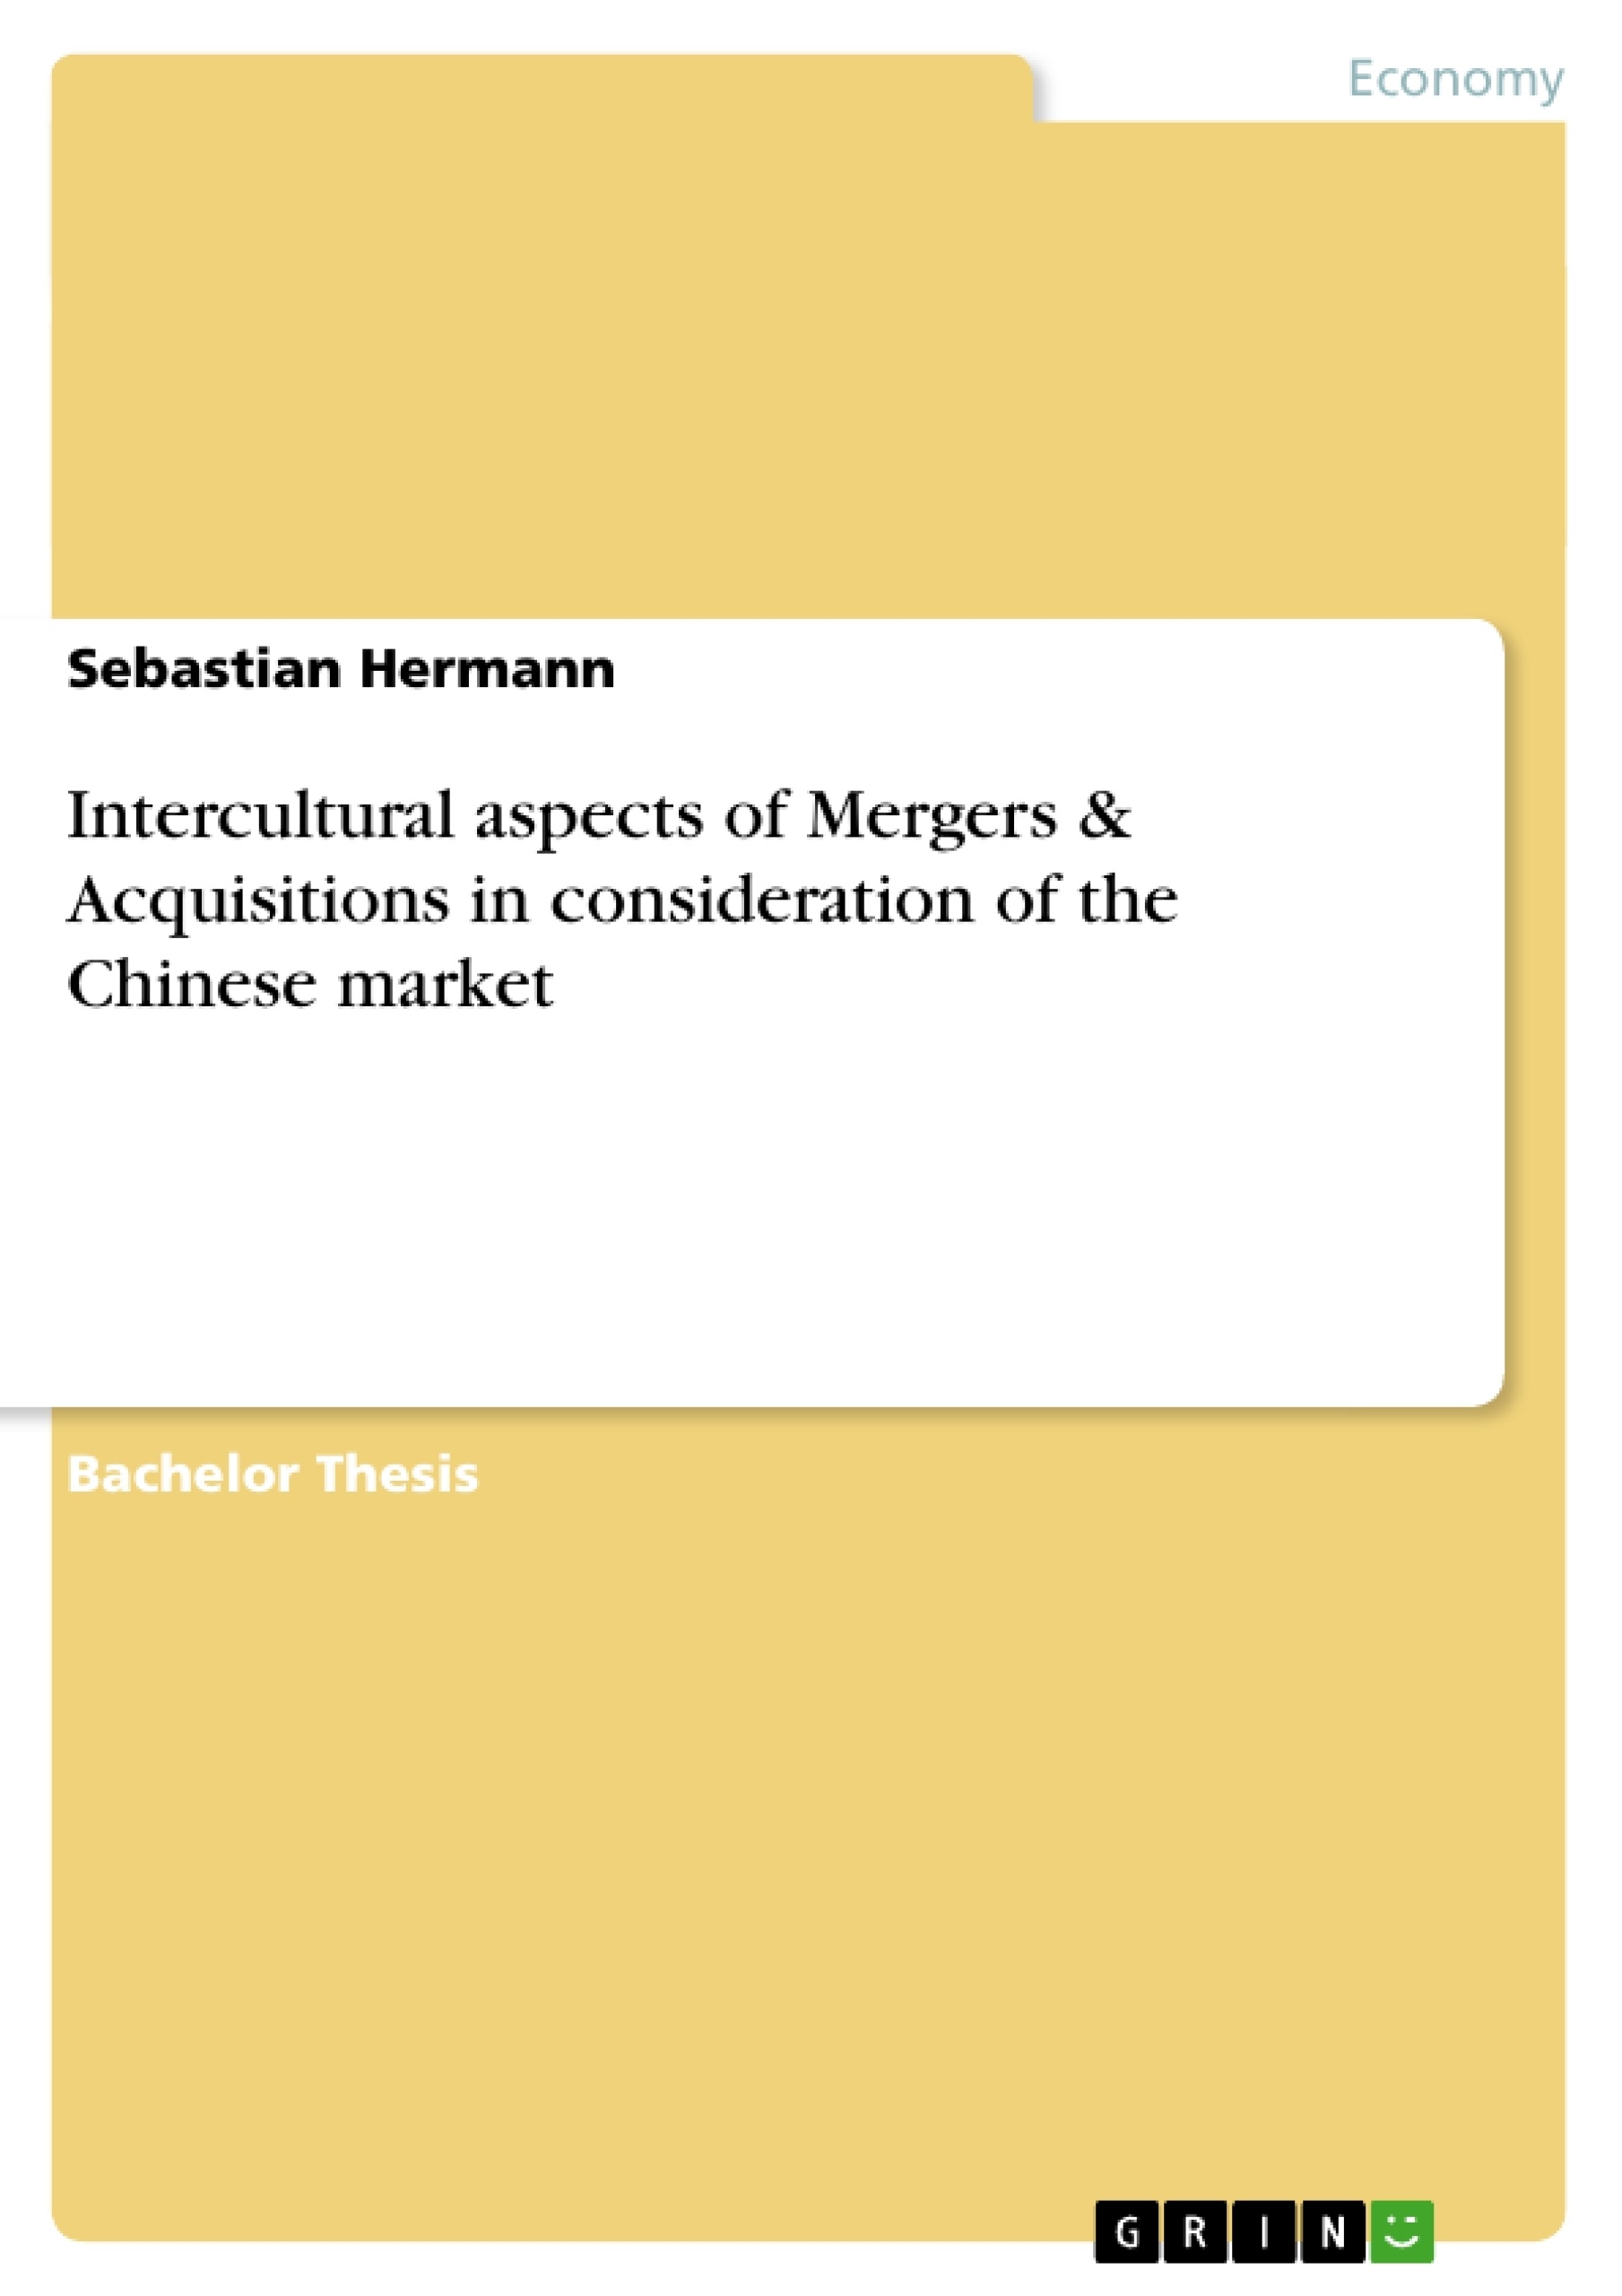 Title: Intercultural aspects of Mergers & Acquisitions in consideration of the Chinese market